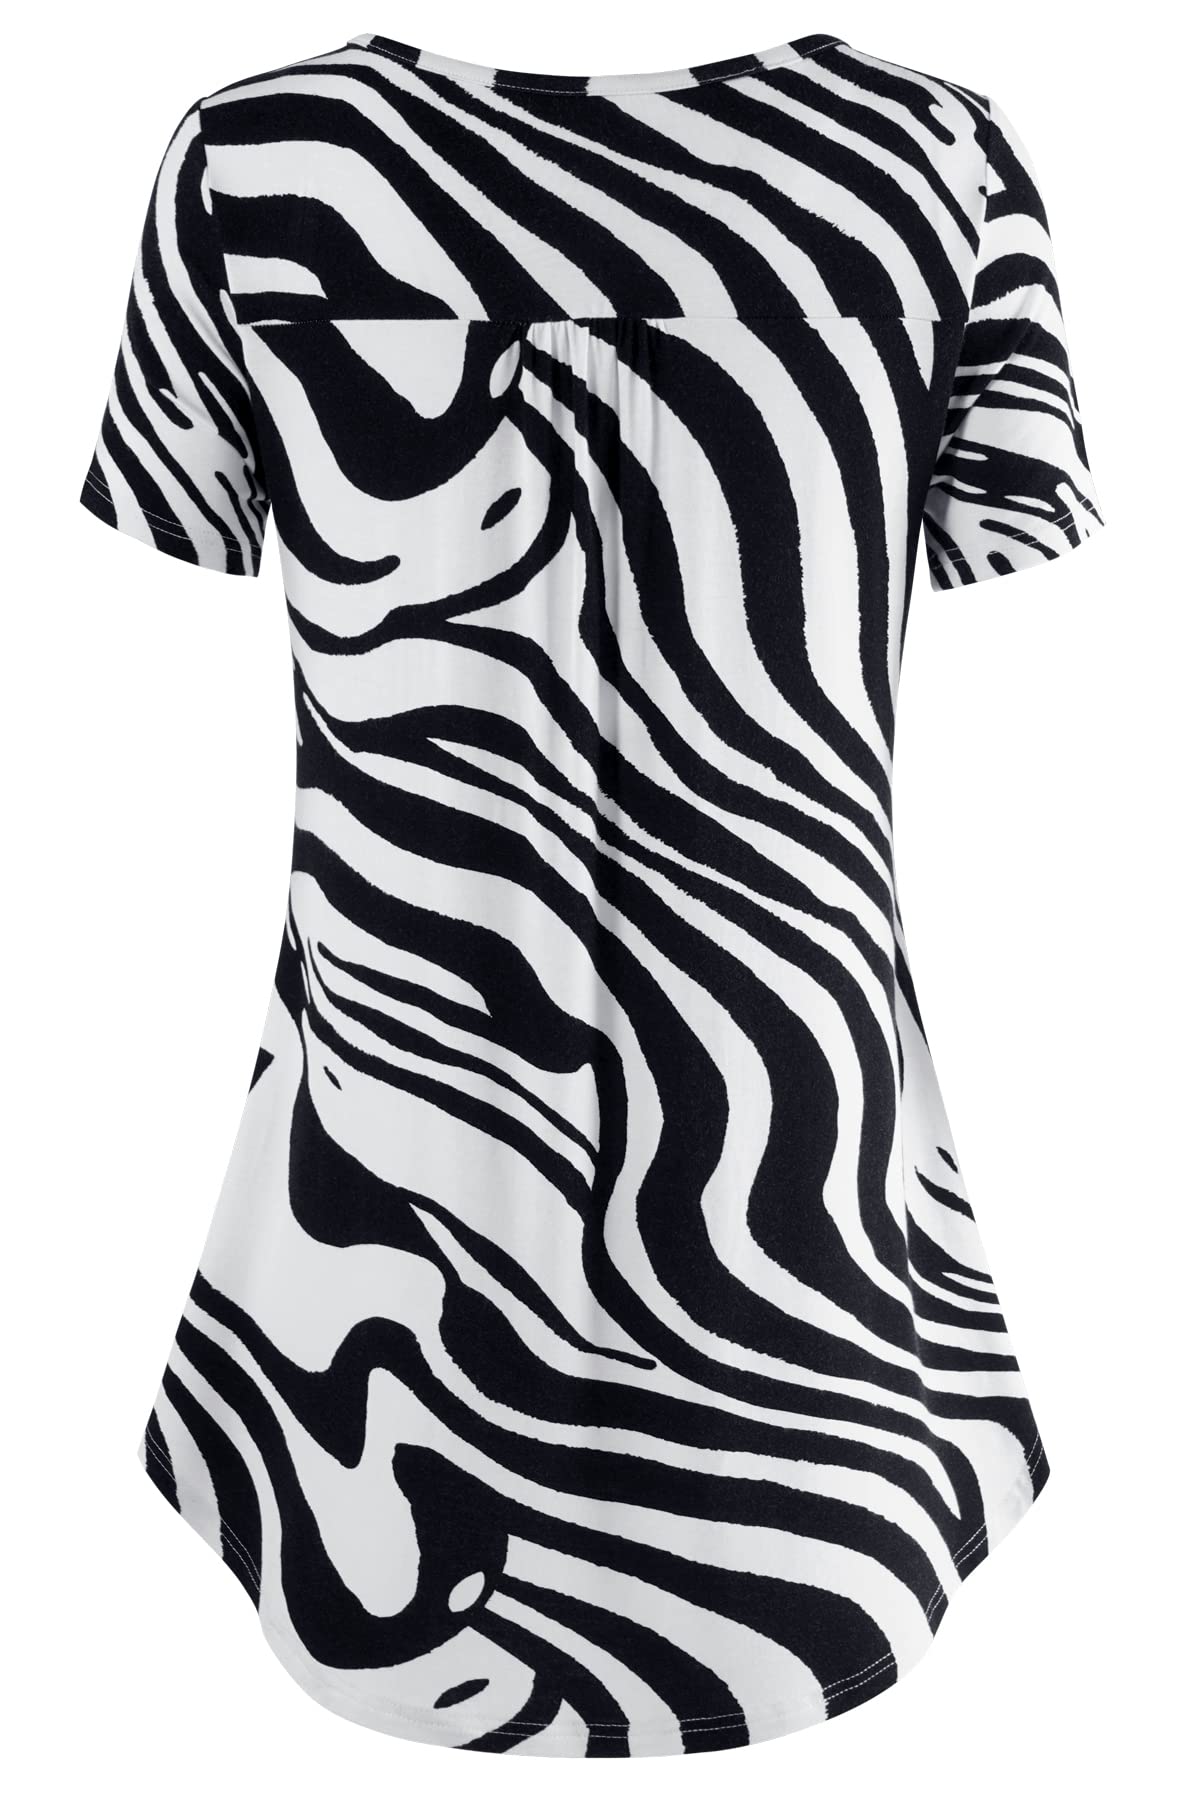 BAISHENGGT Zebra Print Women's V Neck Buttons Pleated Flared Comfy Tunic Tops